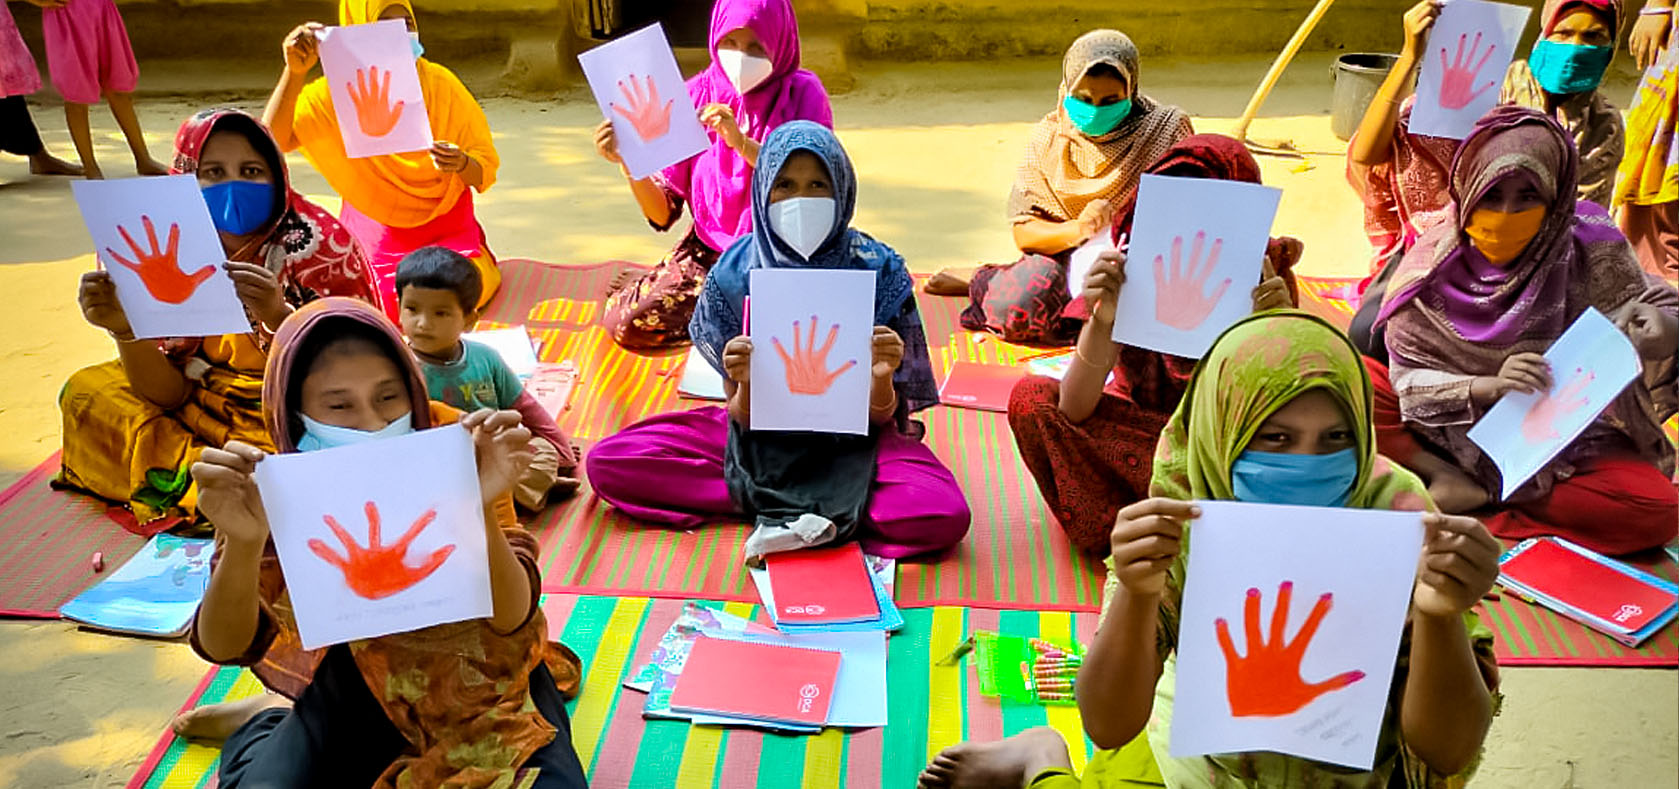 Women from a Bangladeshi community around a Rohingya refugee camp in Cox’s Bazar, Bangladesh, show their paintings signaling, “Stop violence against women and girls”. The event was held at a UN Women facility at Ukhia on 25 November 2021 as part of the United Nations 16 Days of Activism against Gender-based Violence. Photo courtesy of DanChurchAid